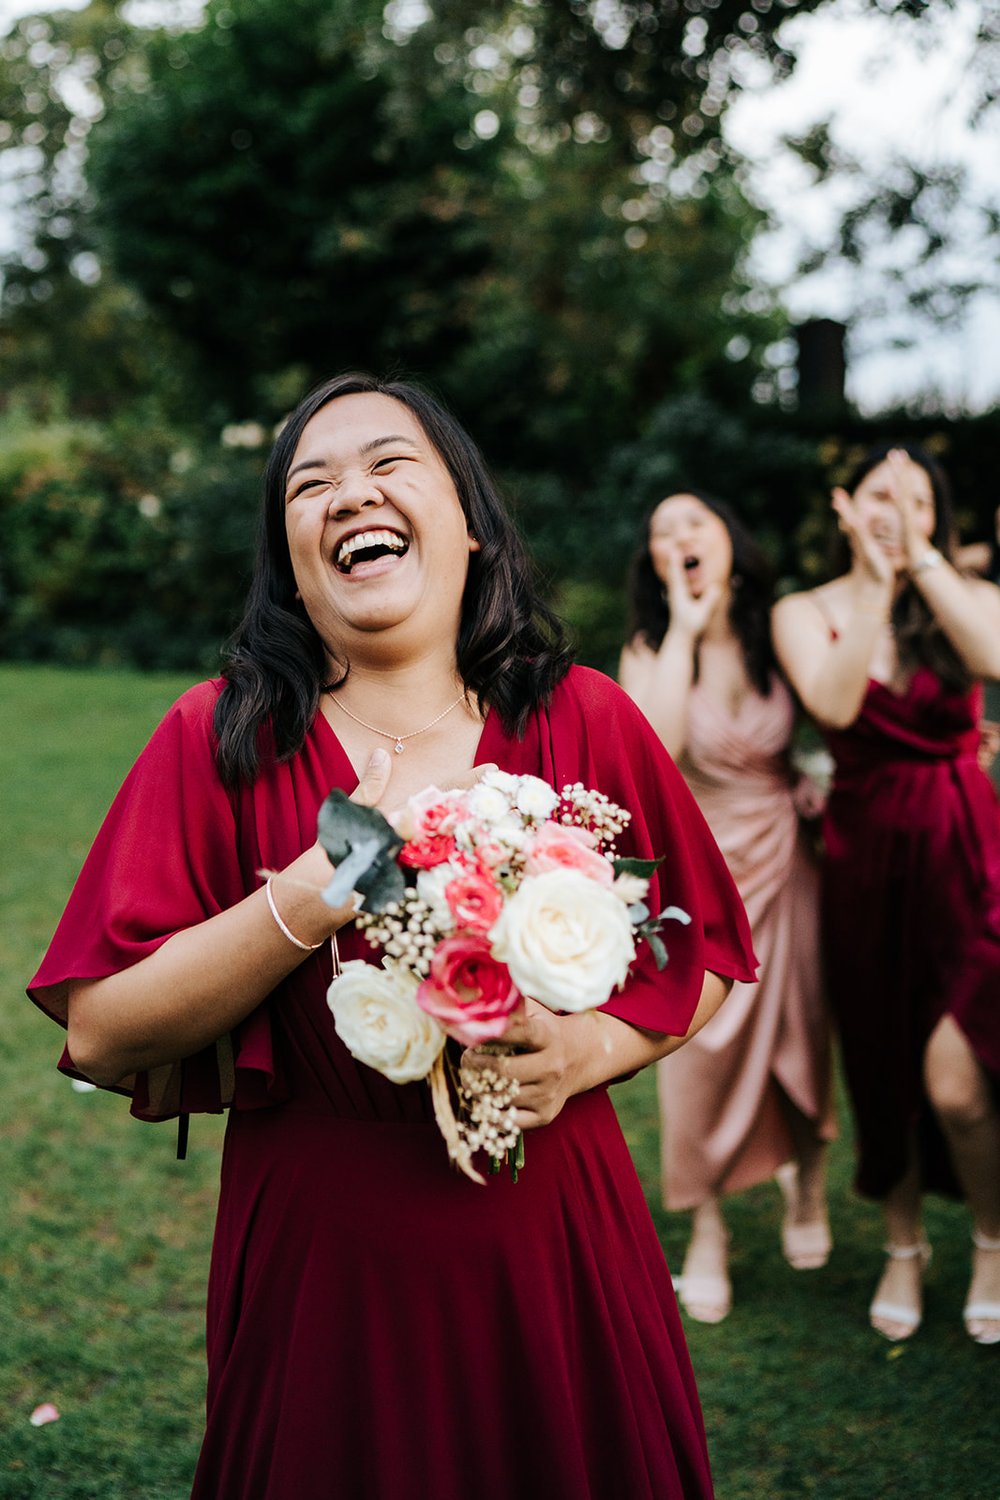 Bride's friend who caught the bouquet is best man's girlfriend. She laughs and smiles!